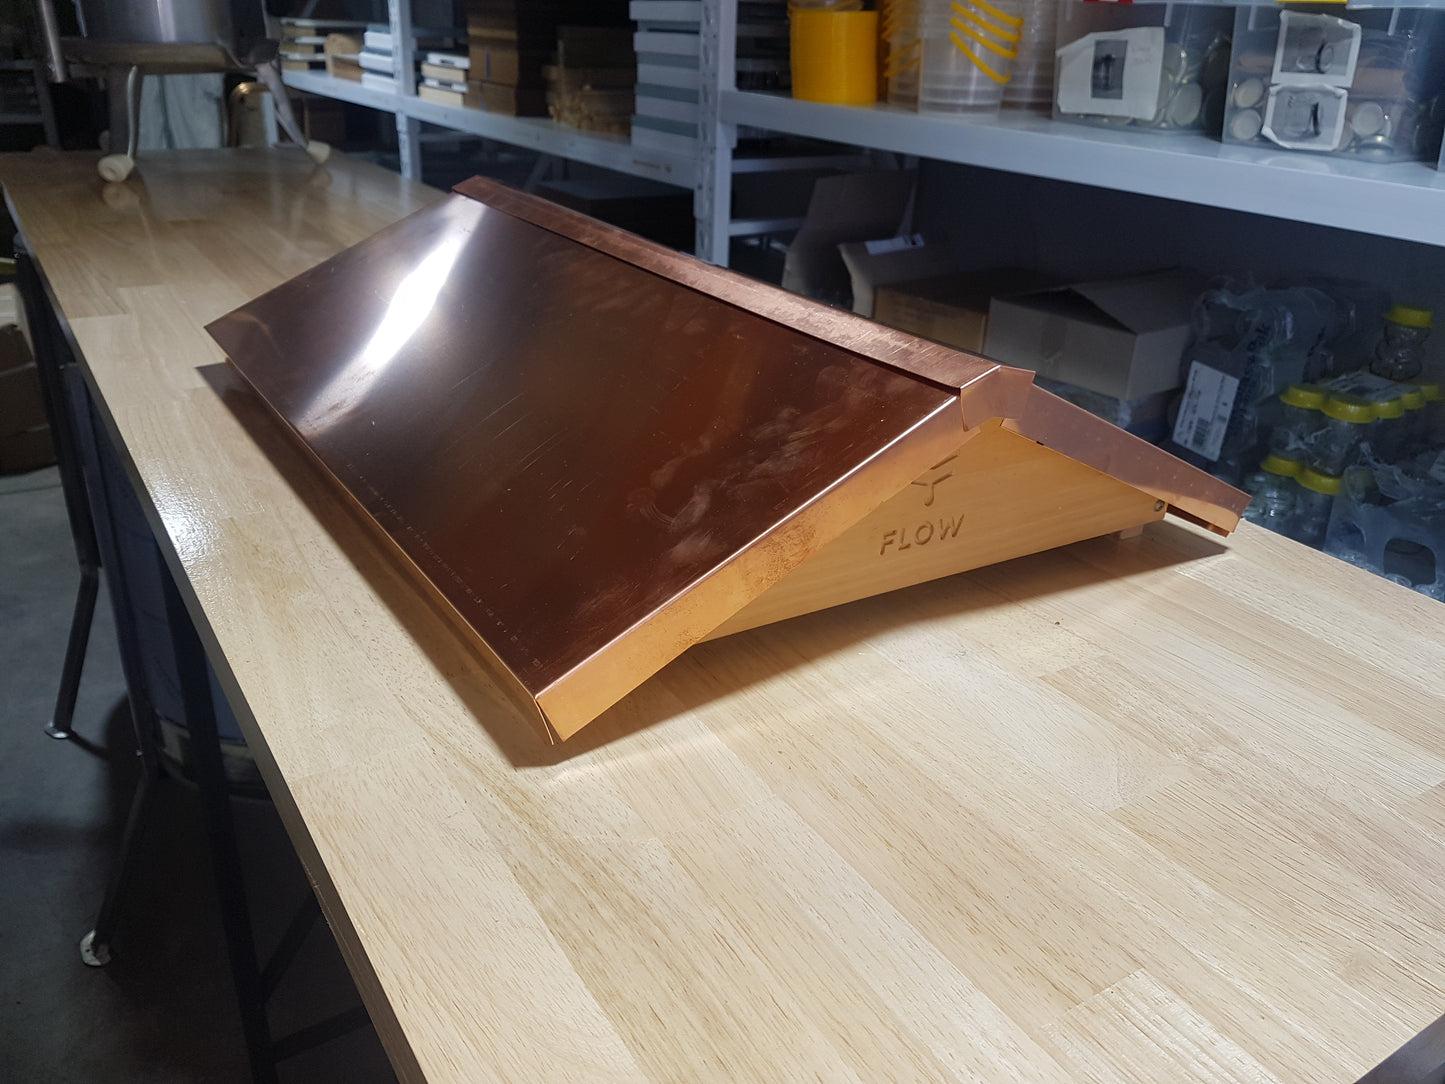 Flow hive® lid copper cover suits 6 frame hive